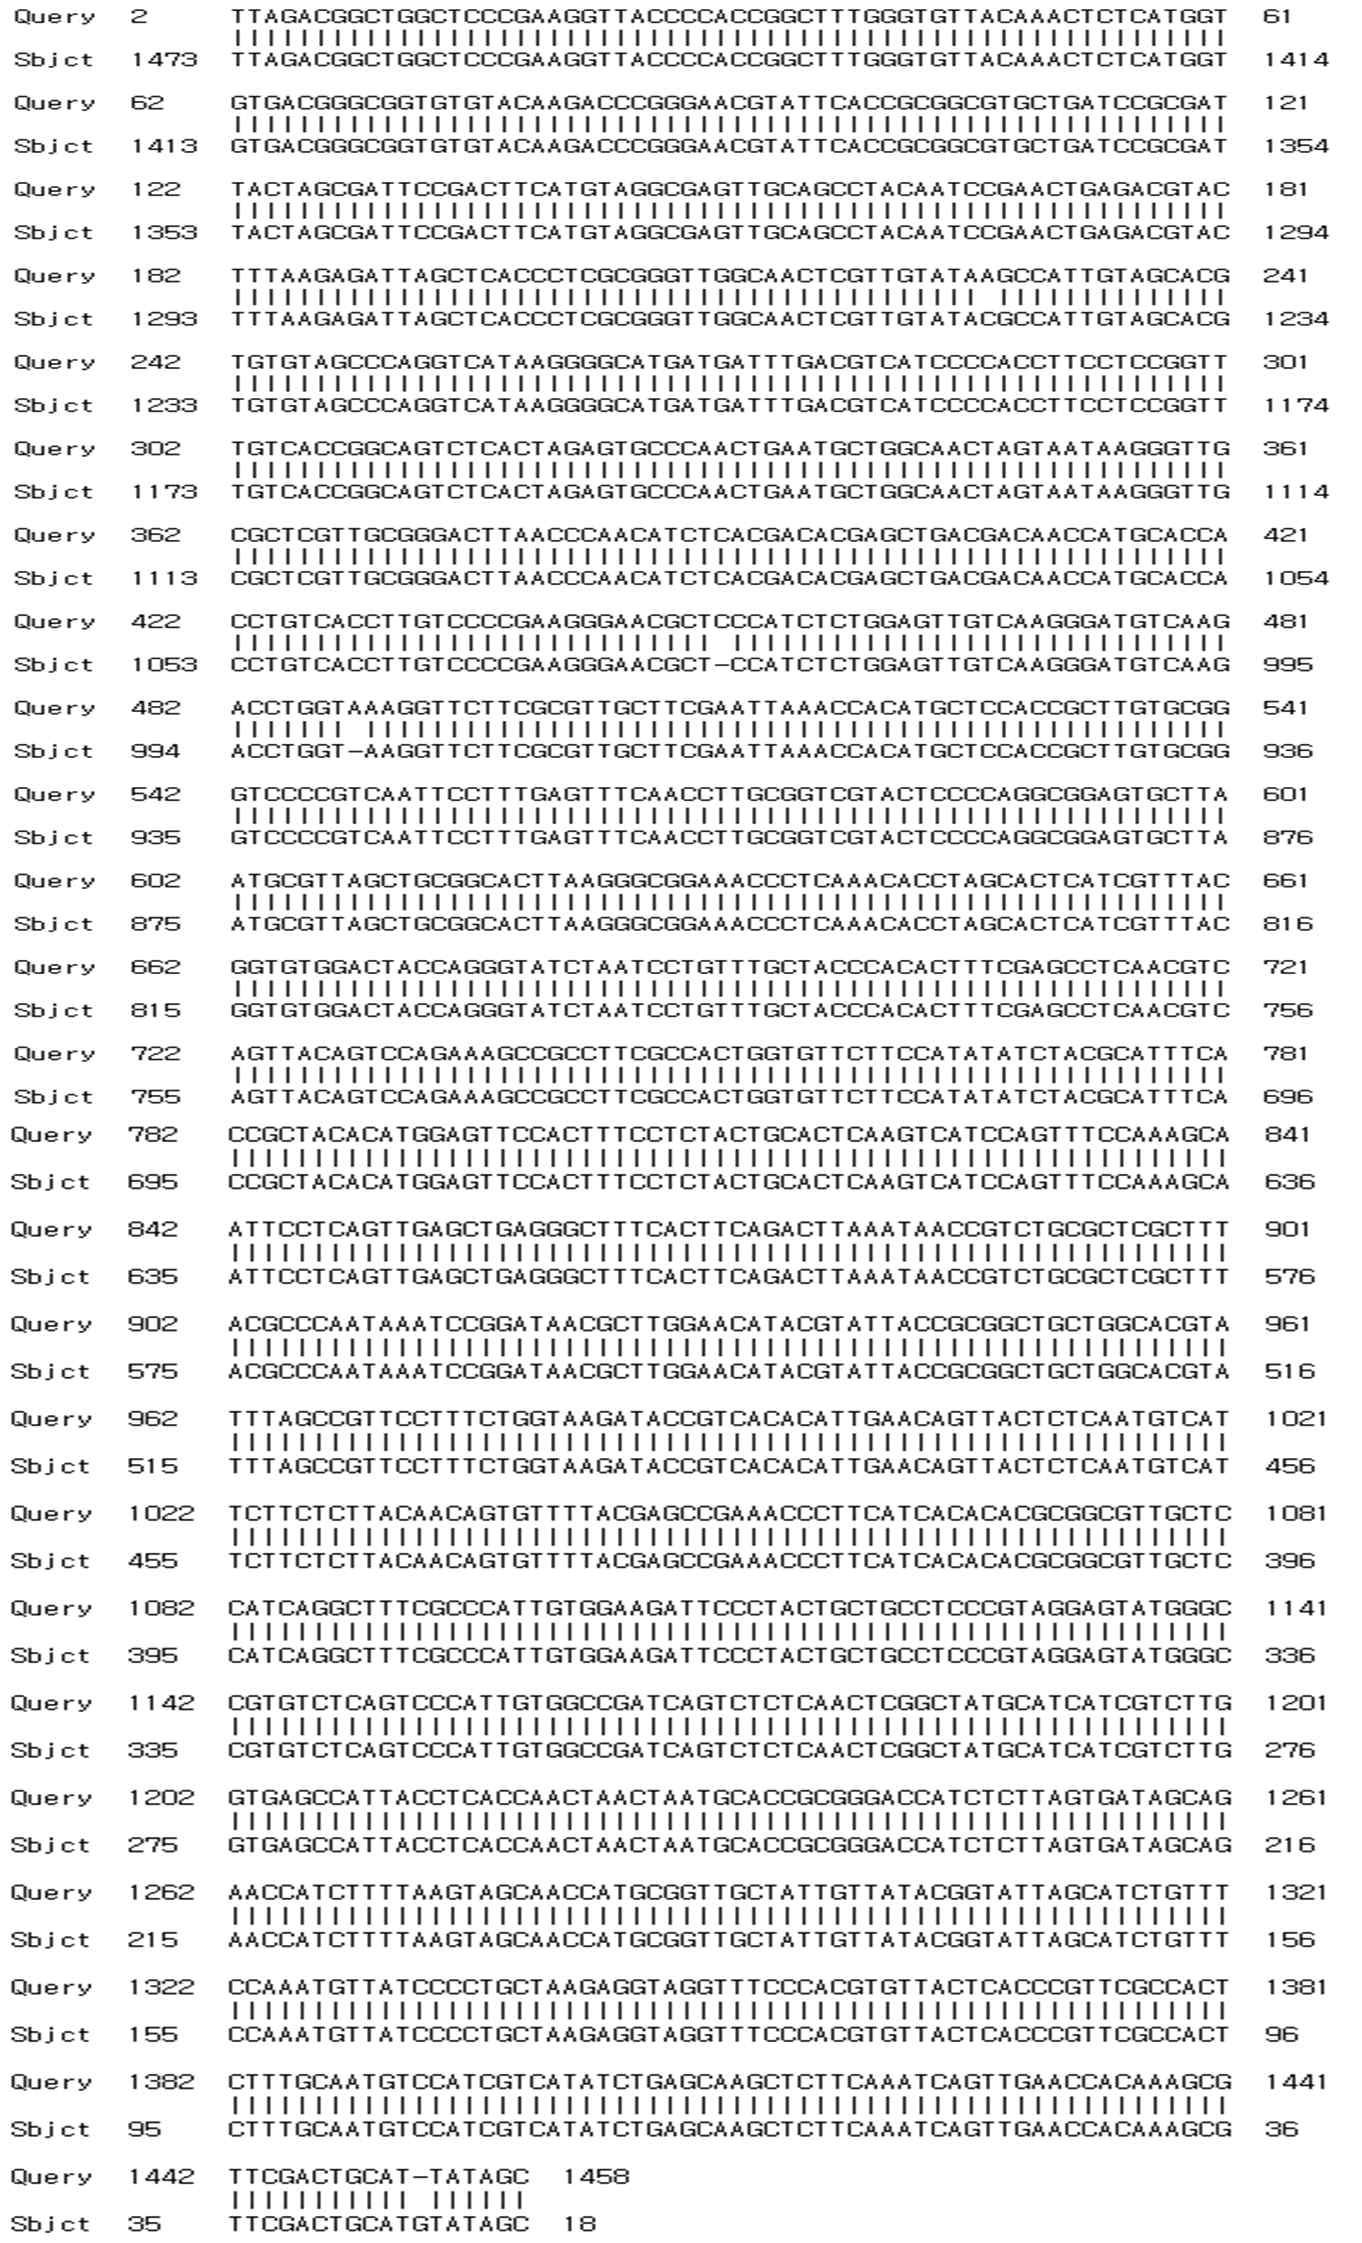 16S rRNA sequencing of F-22 strain